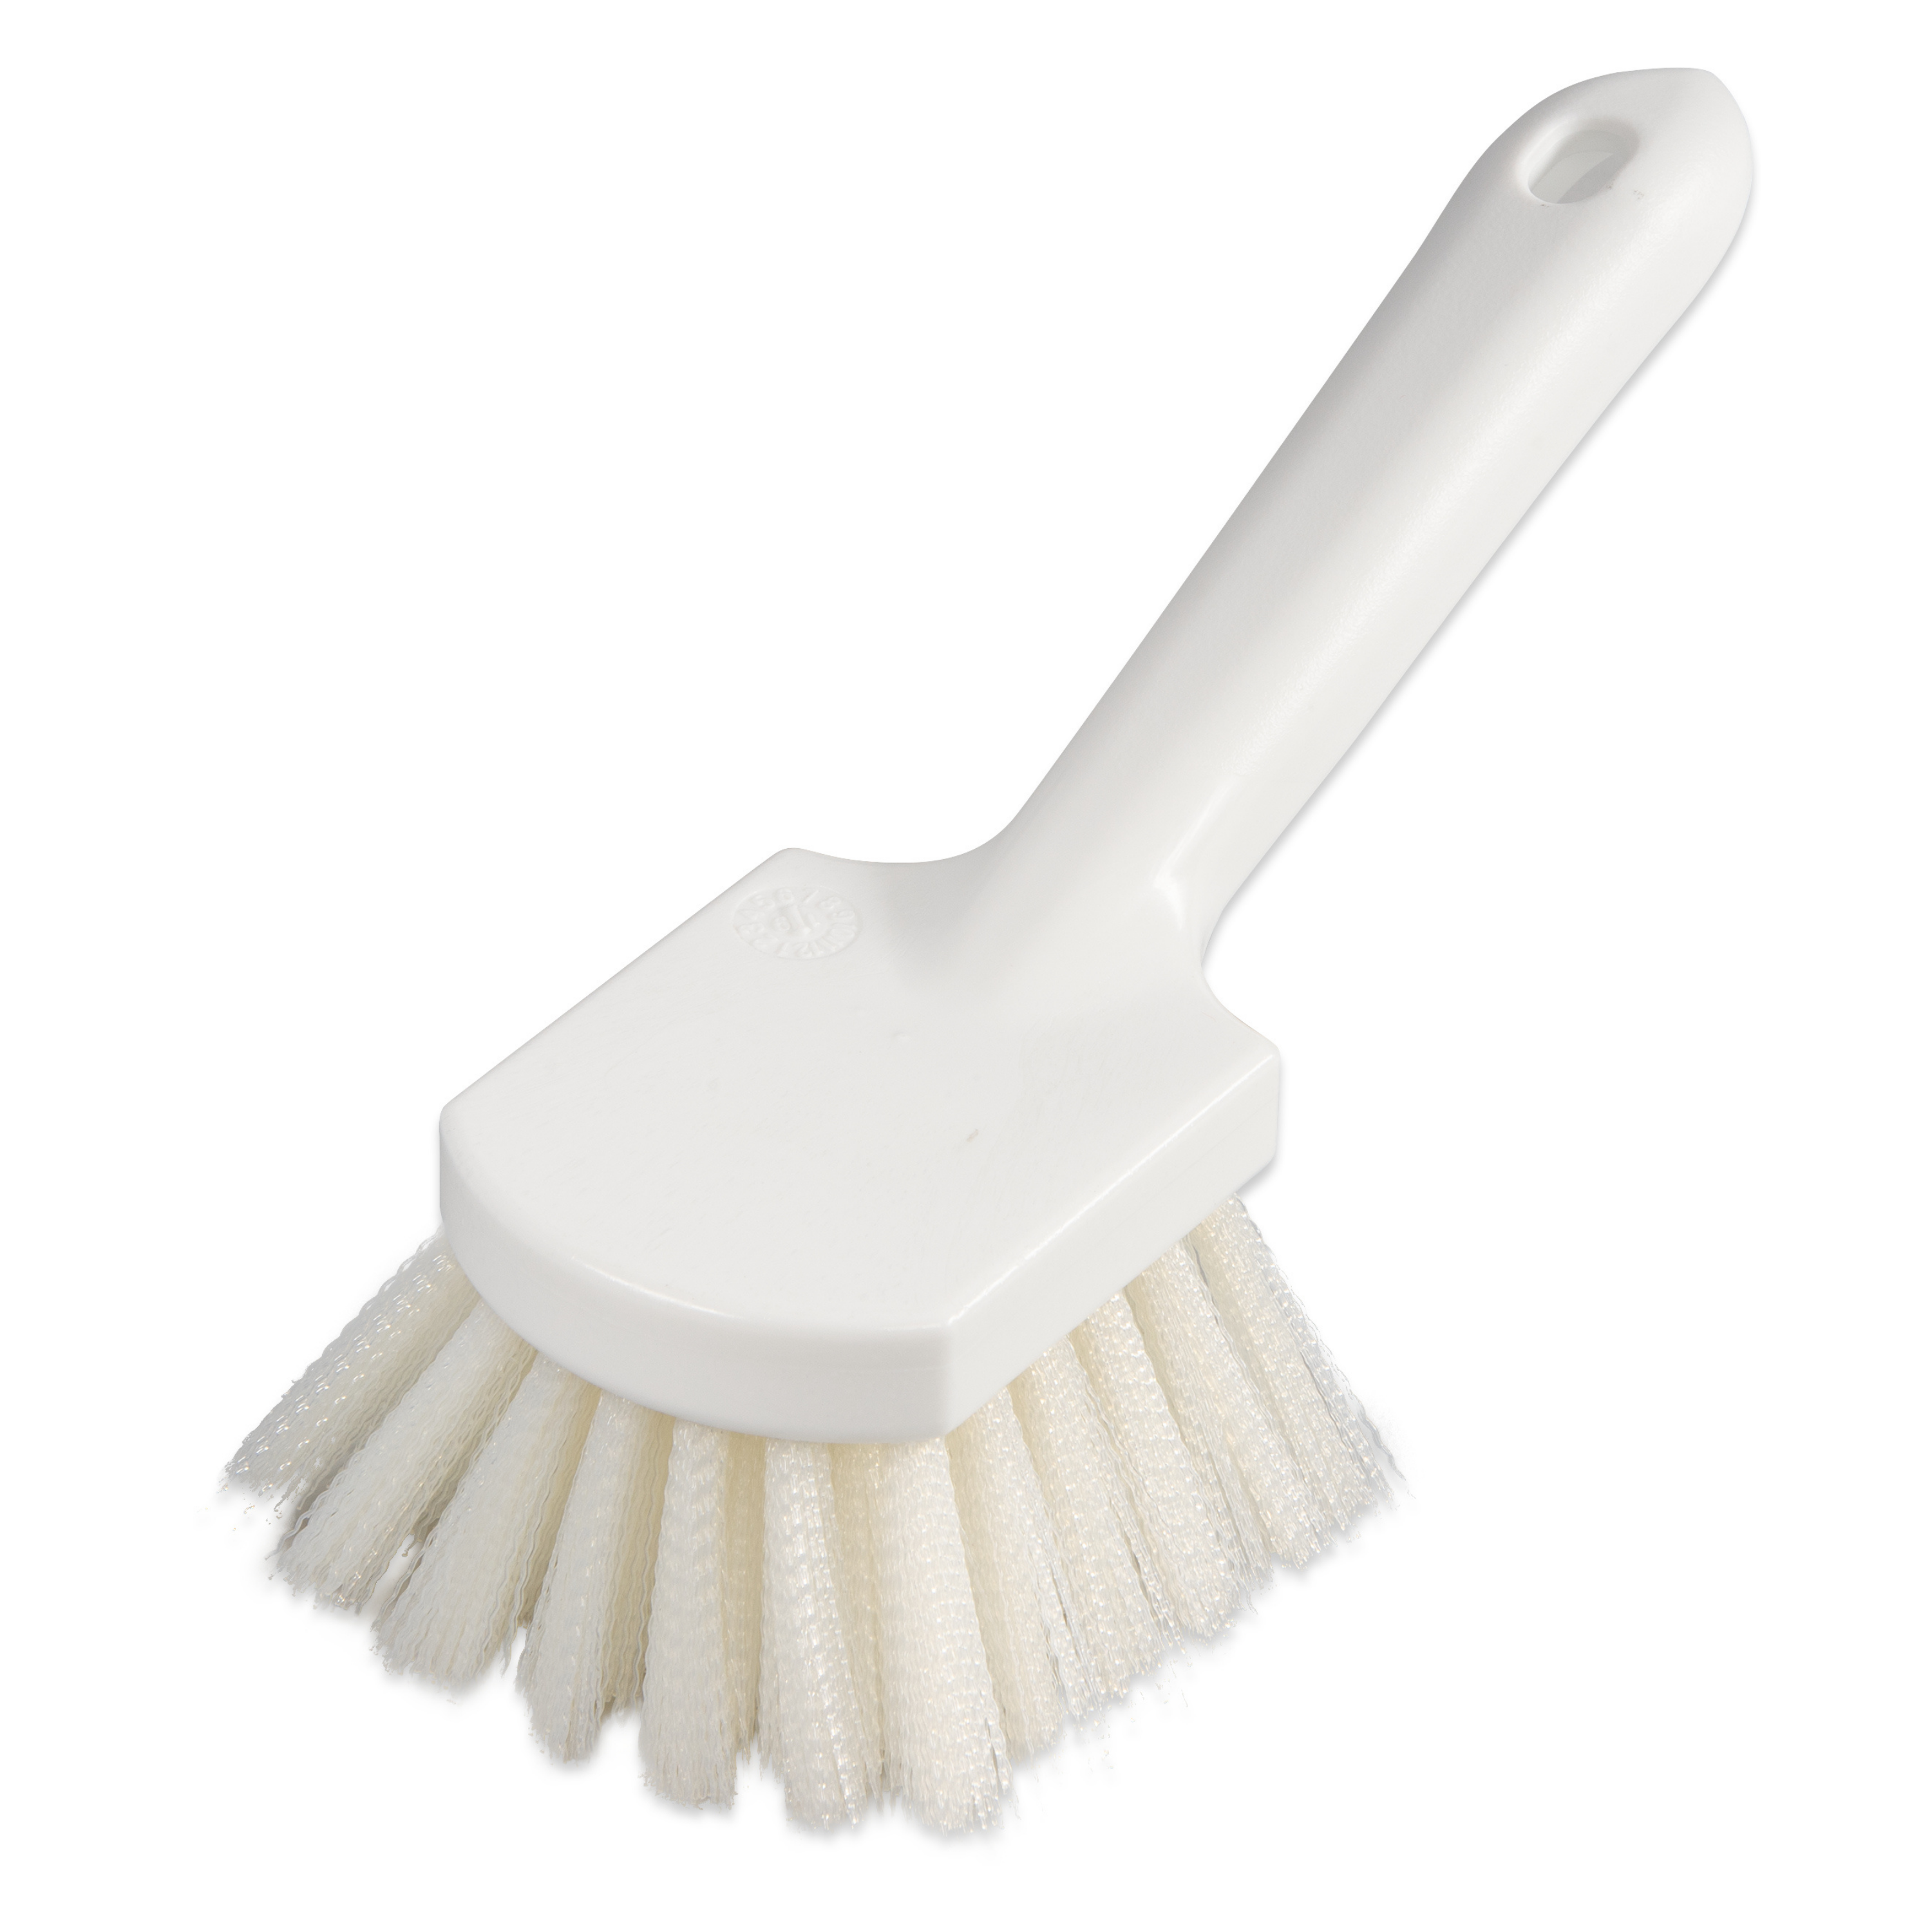 Felton CHEF504 - (Pack of 2) Commercial Grill Brush — Gorka's Food